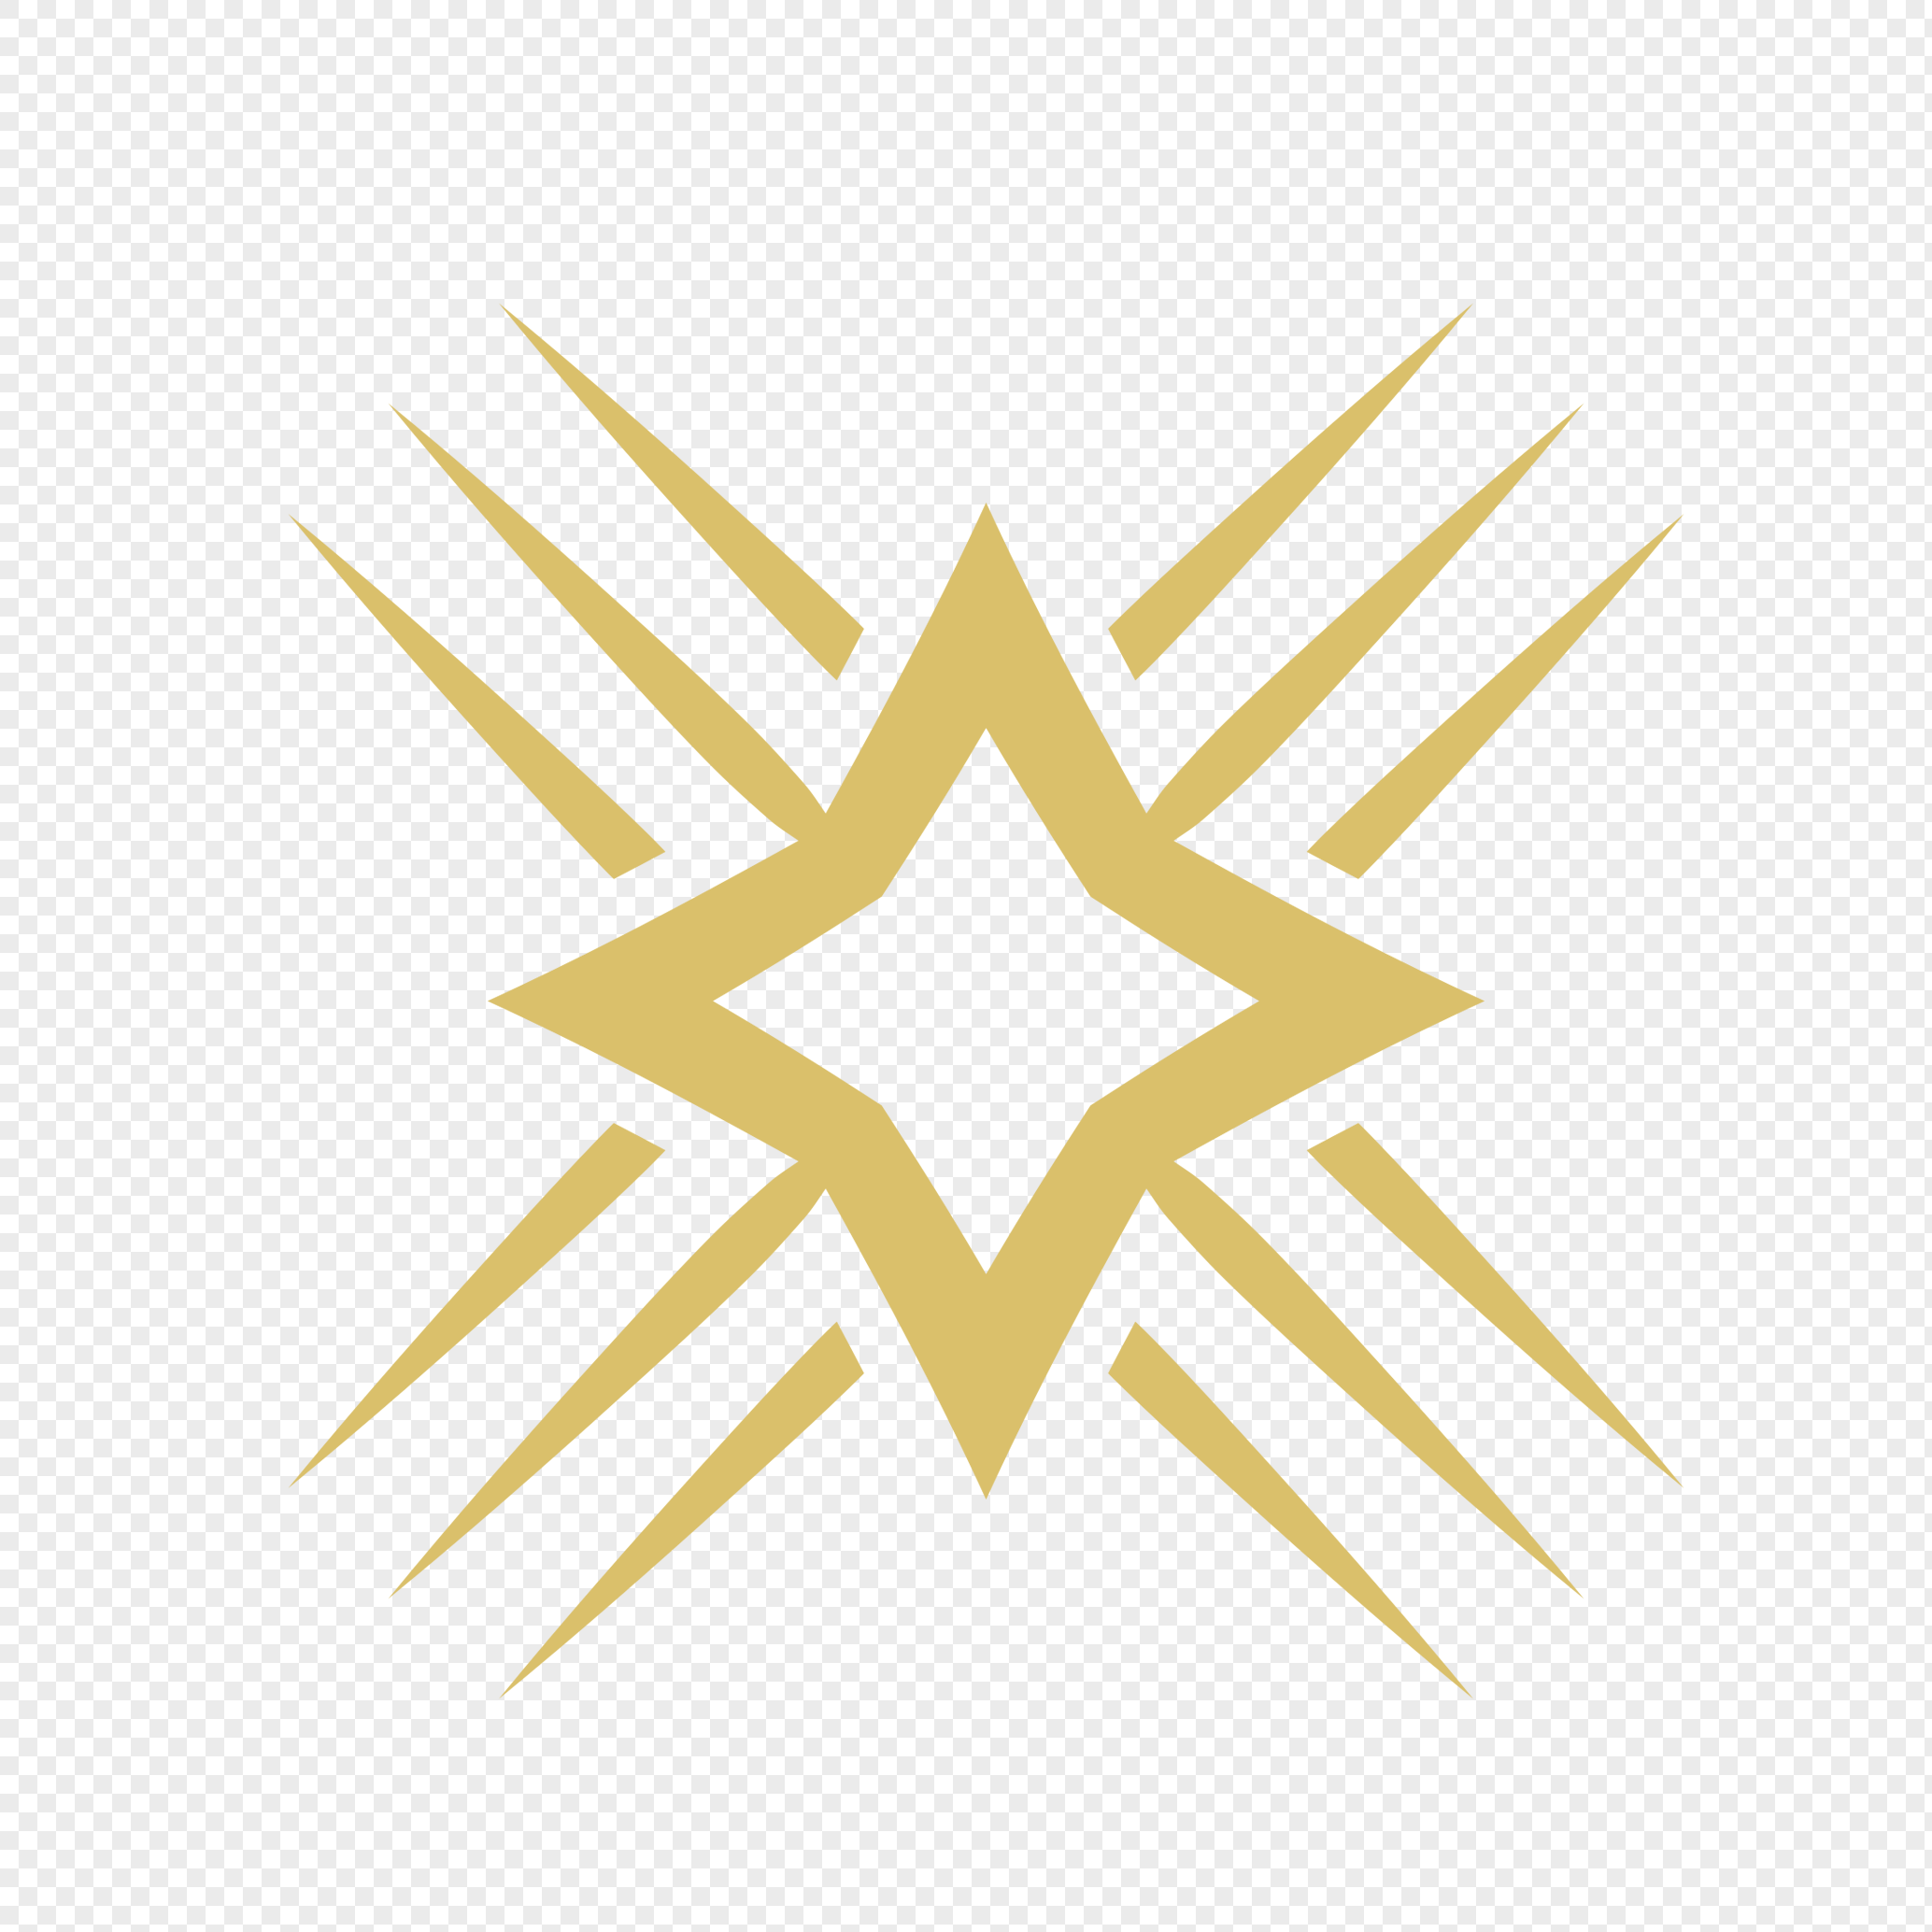 Snow Star Logo - Winter snow star decoration png image_picture free download